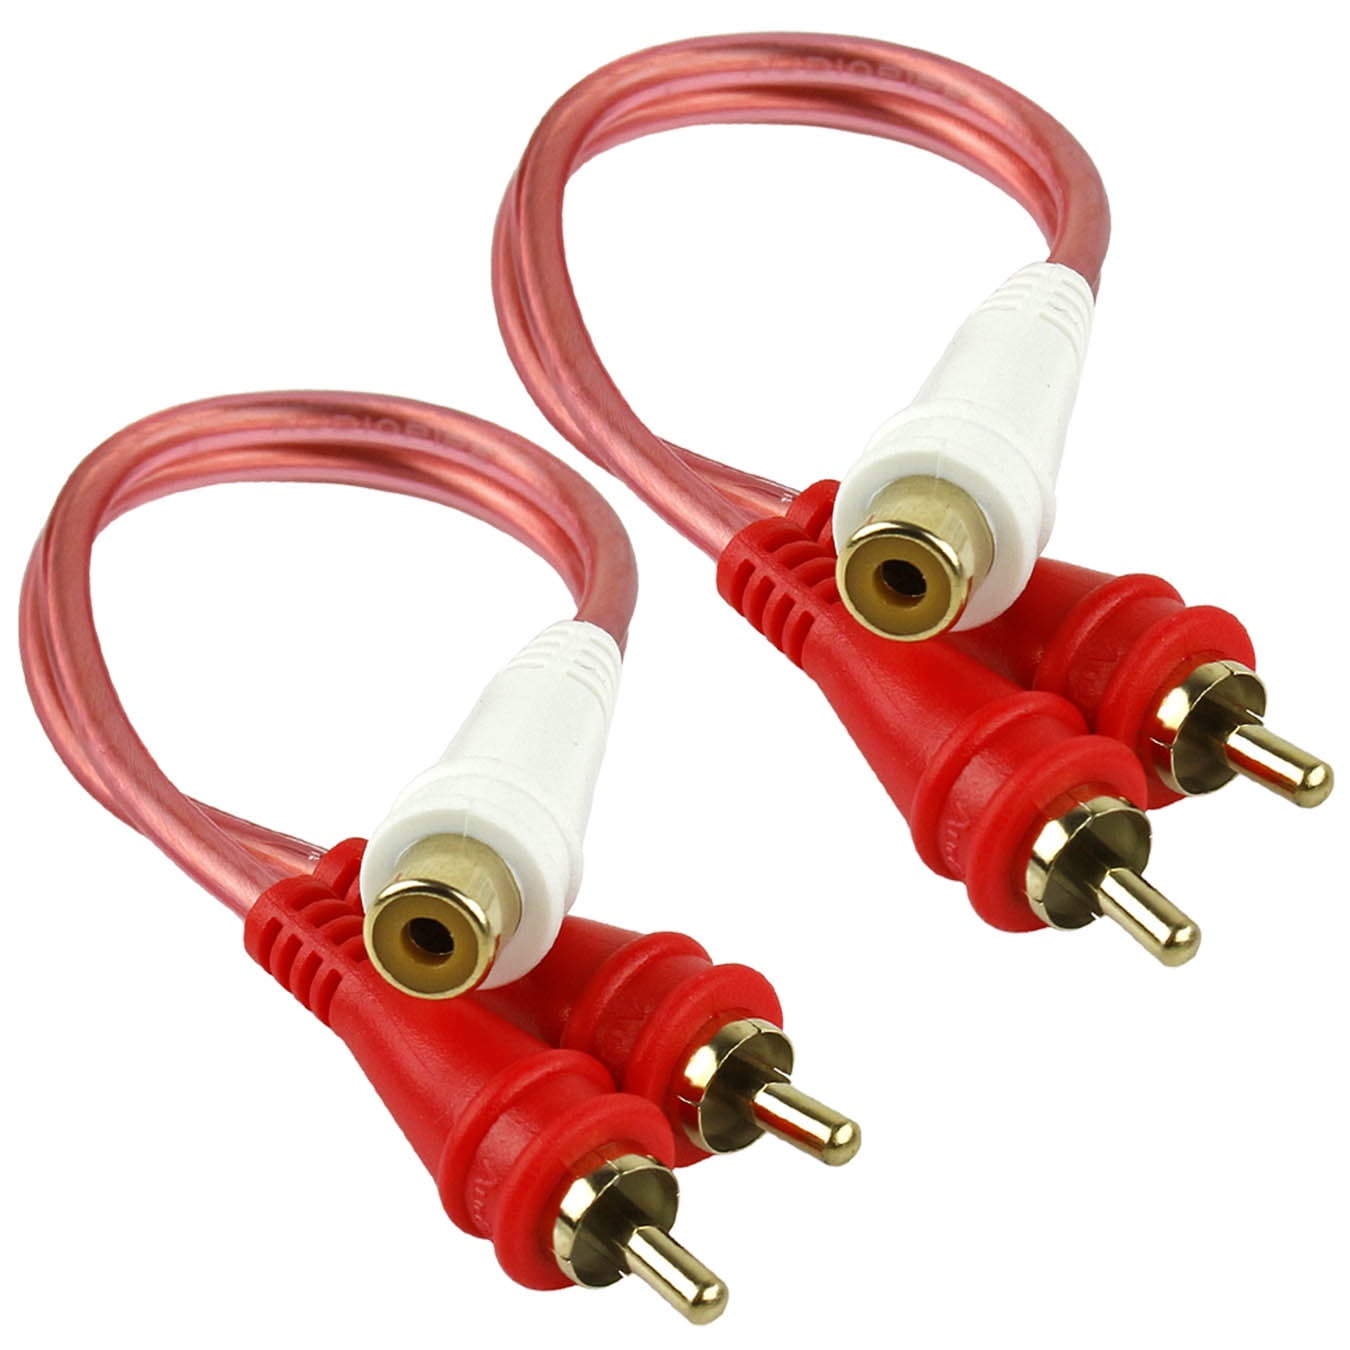 5 PCS 20 FT RCA WIRE AUDIOPIPE 2 CHANNEL CAR HOME AUDIO INTERCONNECT BMS-20 